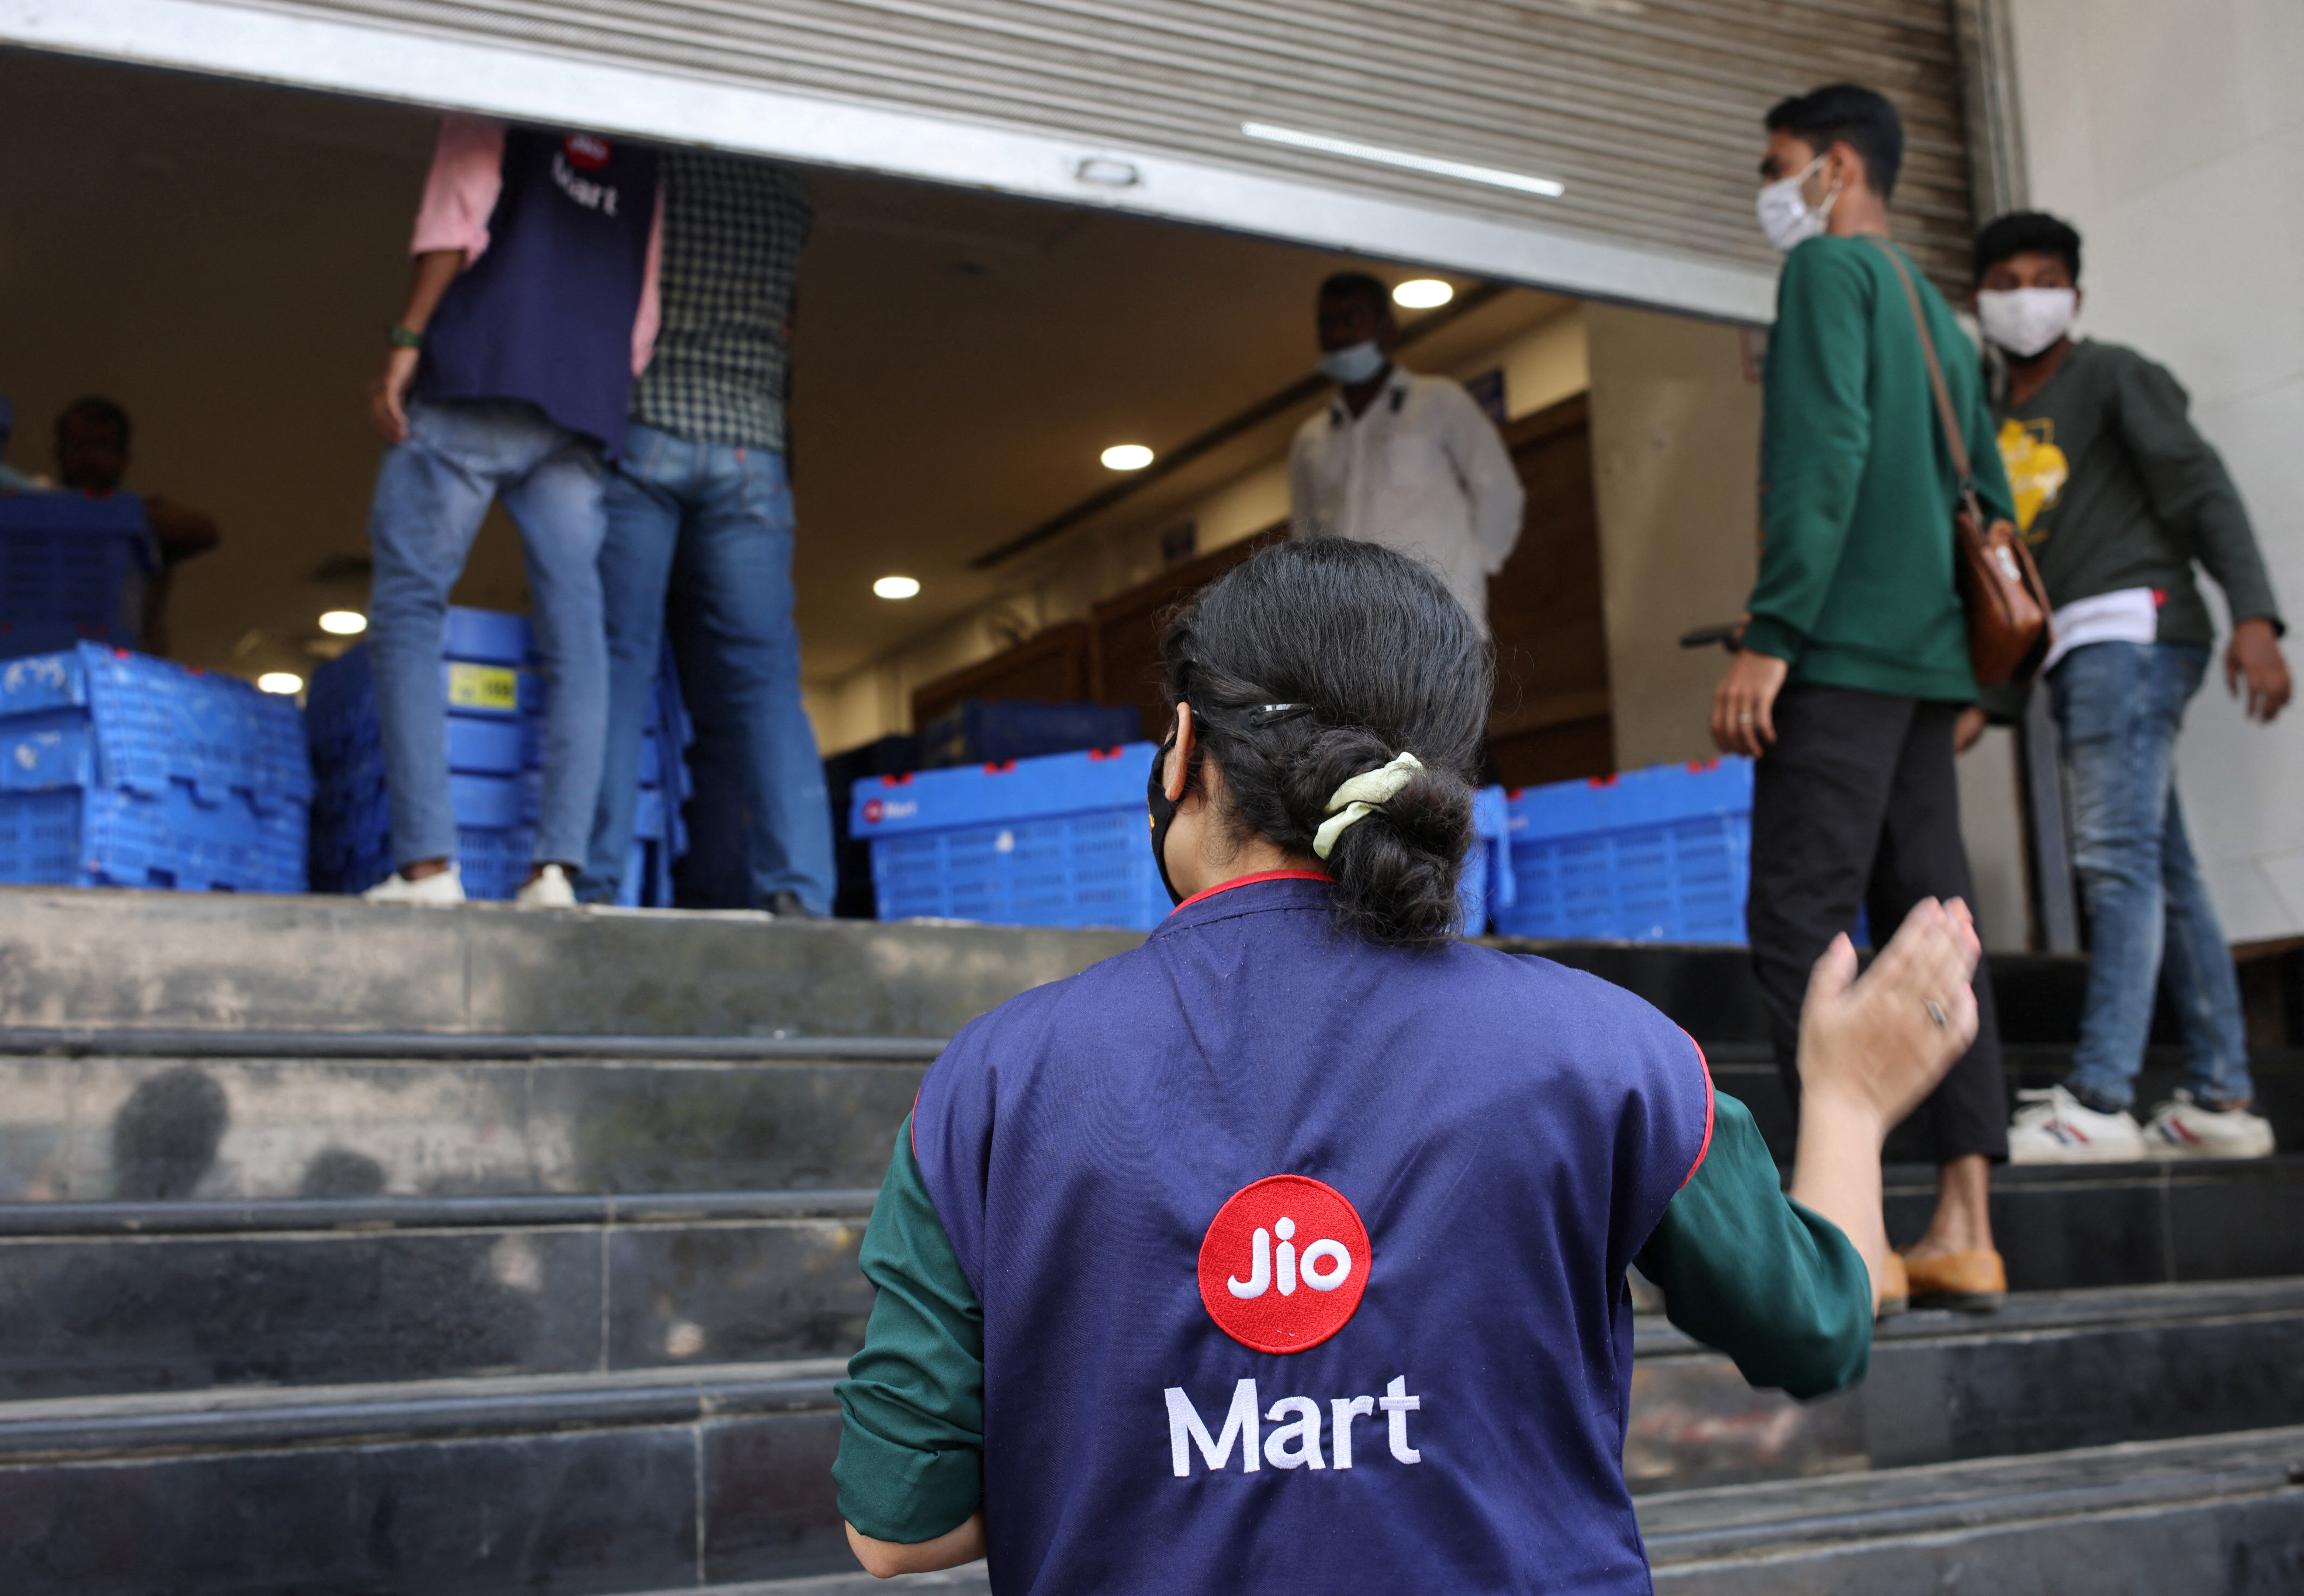 A woman wearing a Reliance JioMart vest instructs workers as they stock their products inside a Future Retail's closed Big Bazaar retail store in Mumbai